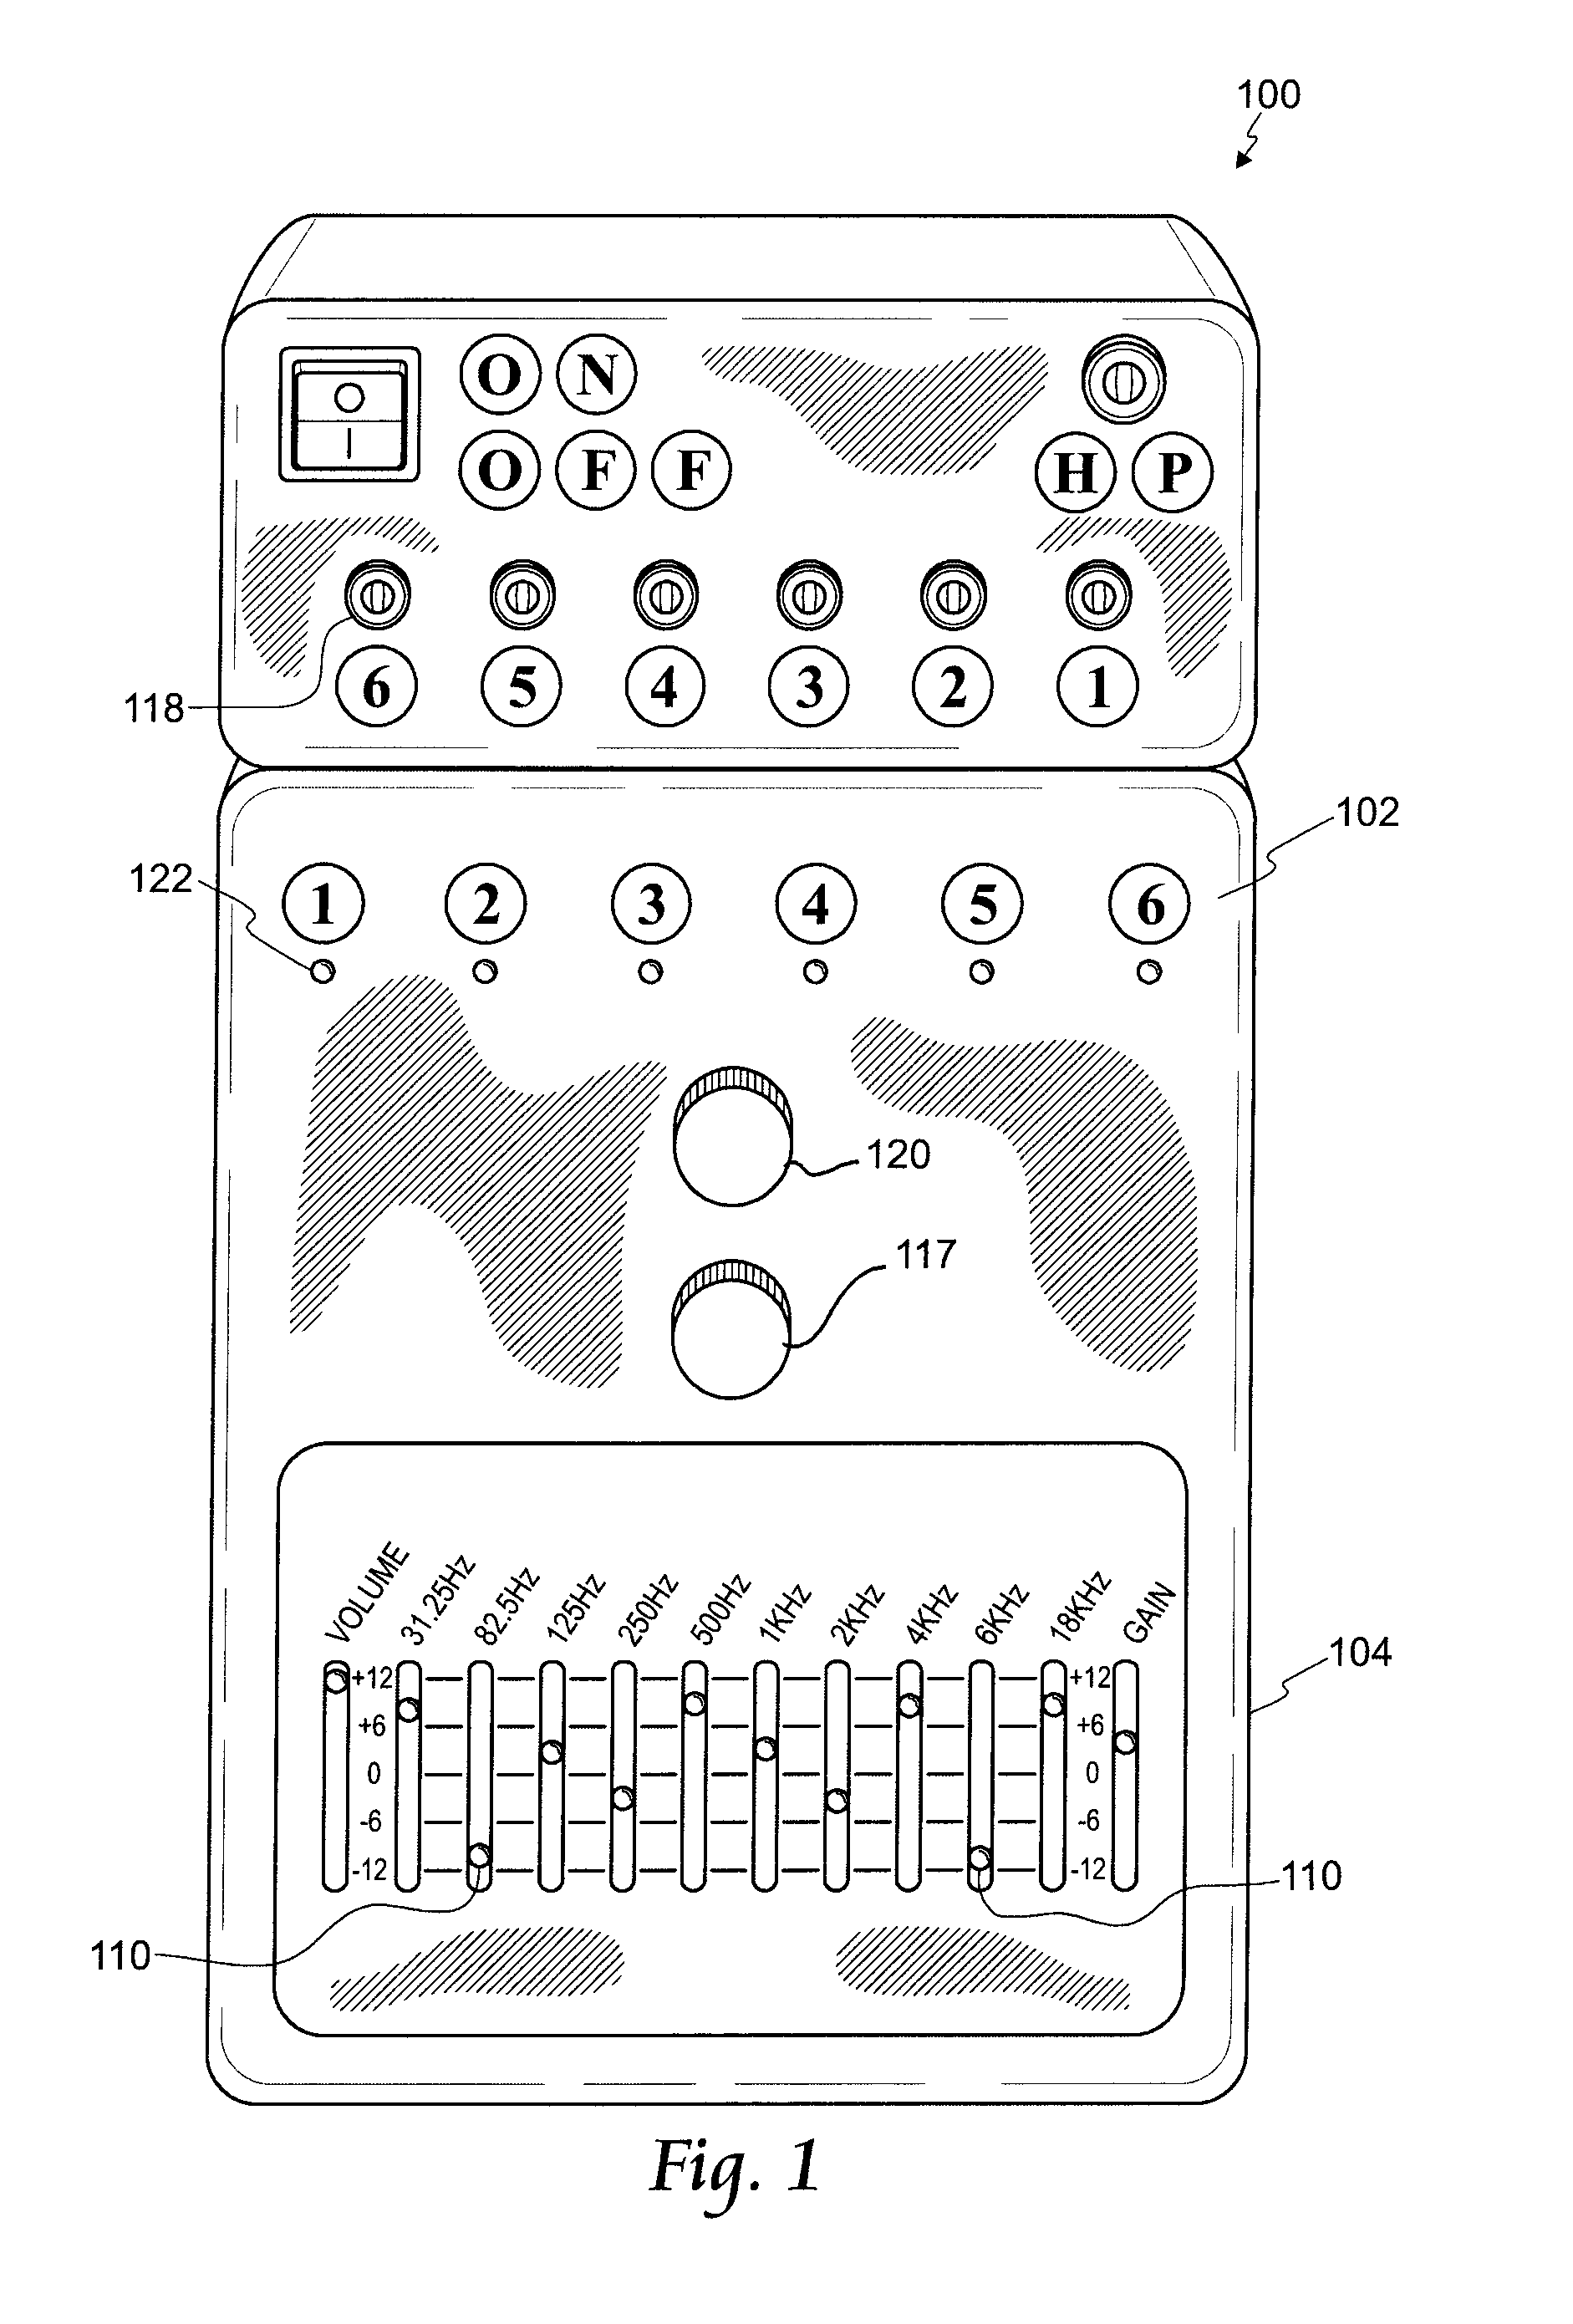 Vehicle diagnostic listening device and method therefor